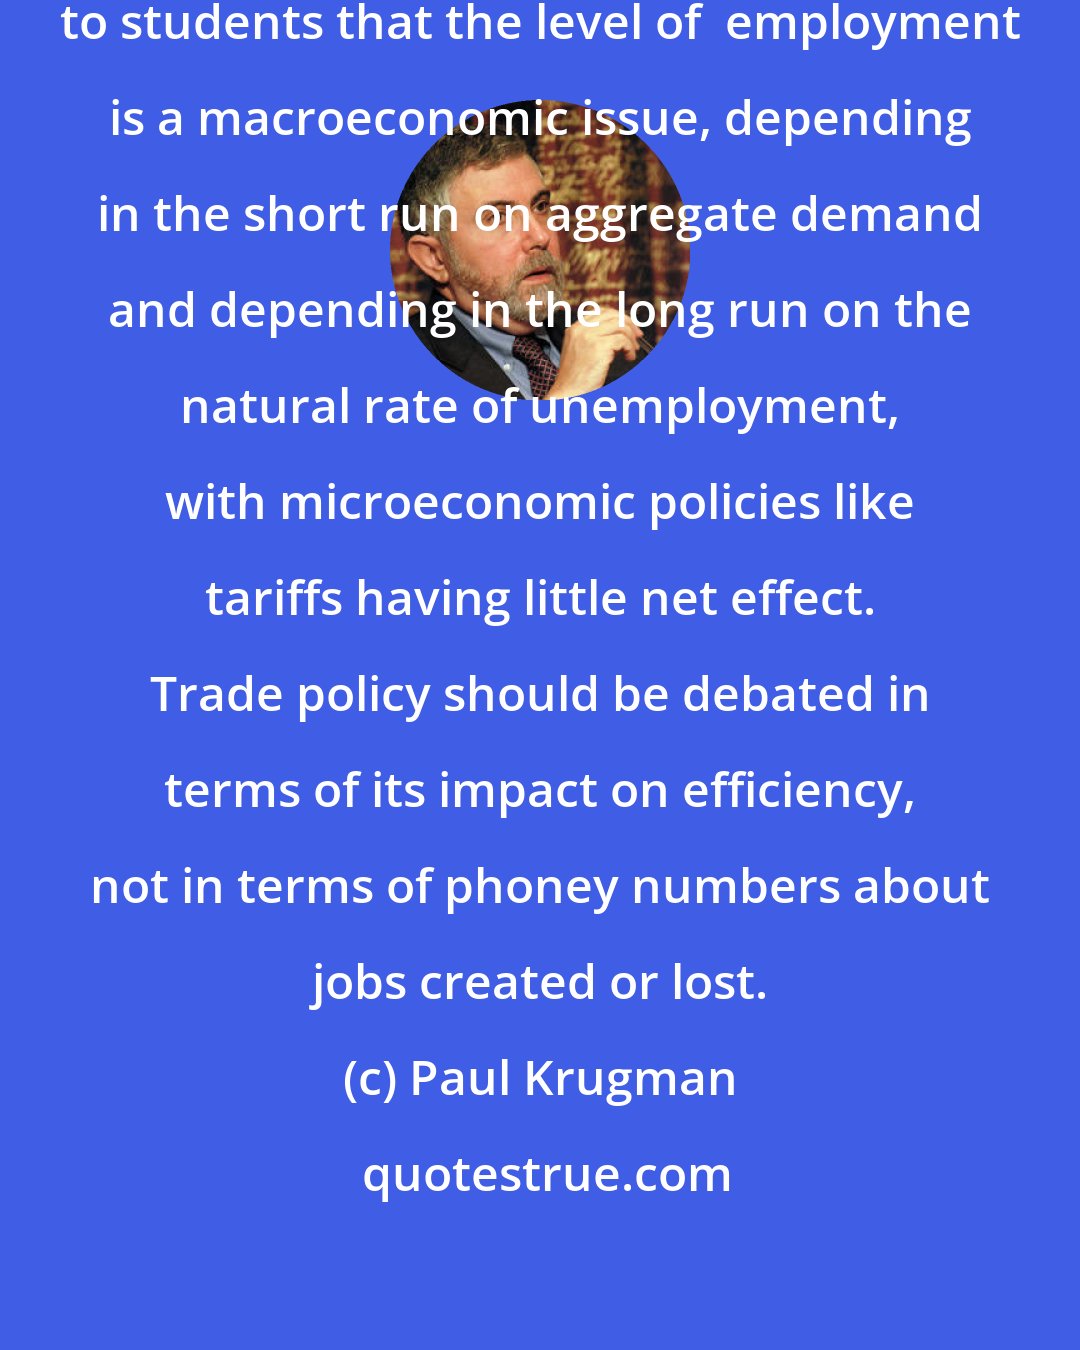 Paul Krugman: It should be possible to emphasize to students that the level of  employment is a macroeconomic issue, depending in the short run on aggregate demand and depending in the long run on the natural rate of unemployment, with microeconomic policies like tariffs having little net effect. Trade policy should be debated in terms of its impact on efficiency, not in terms of phoney numbers about jobs created or lost.